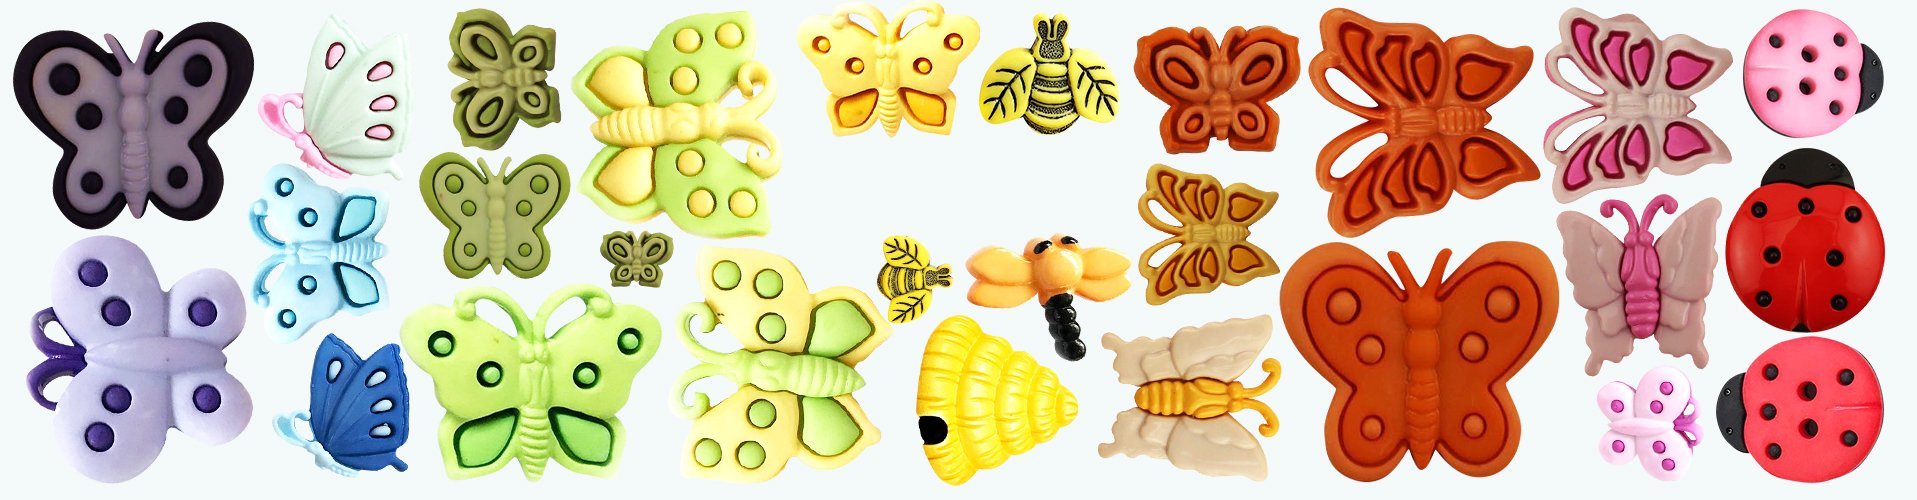 Butterflies & Bugs | Buttons Galore and More